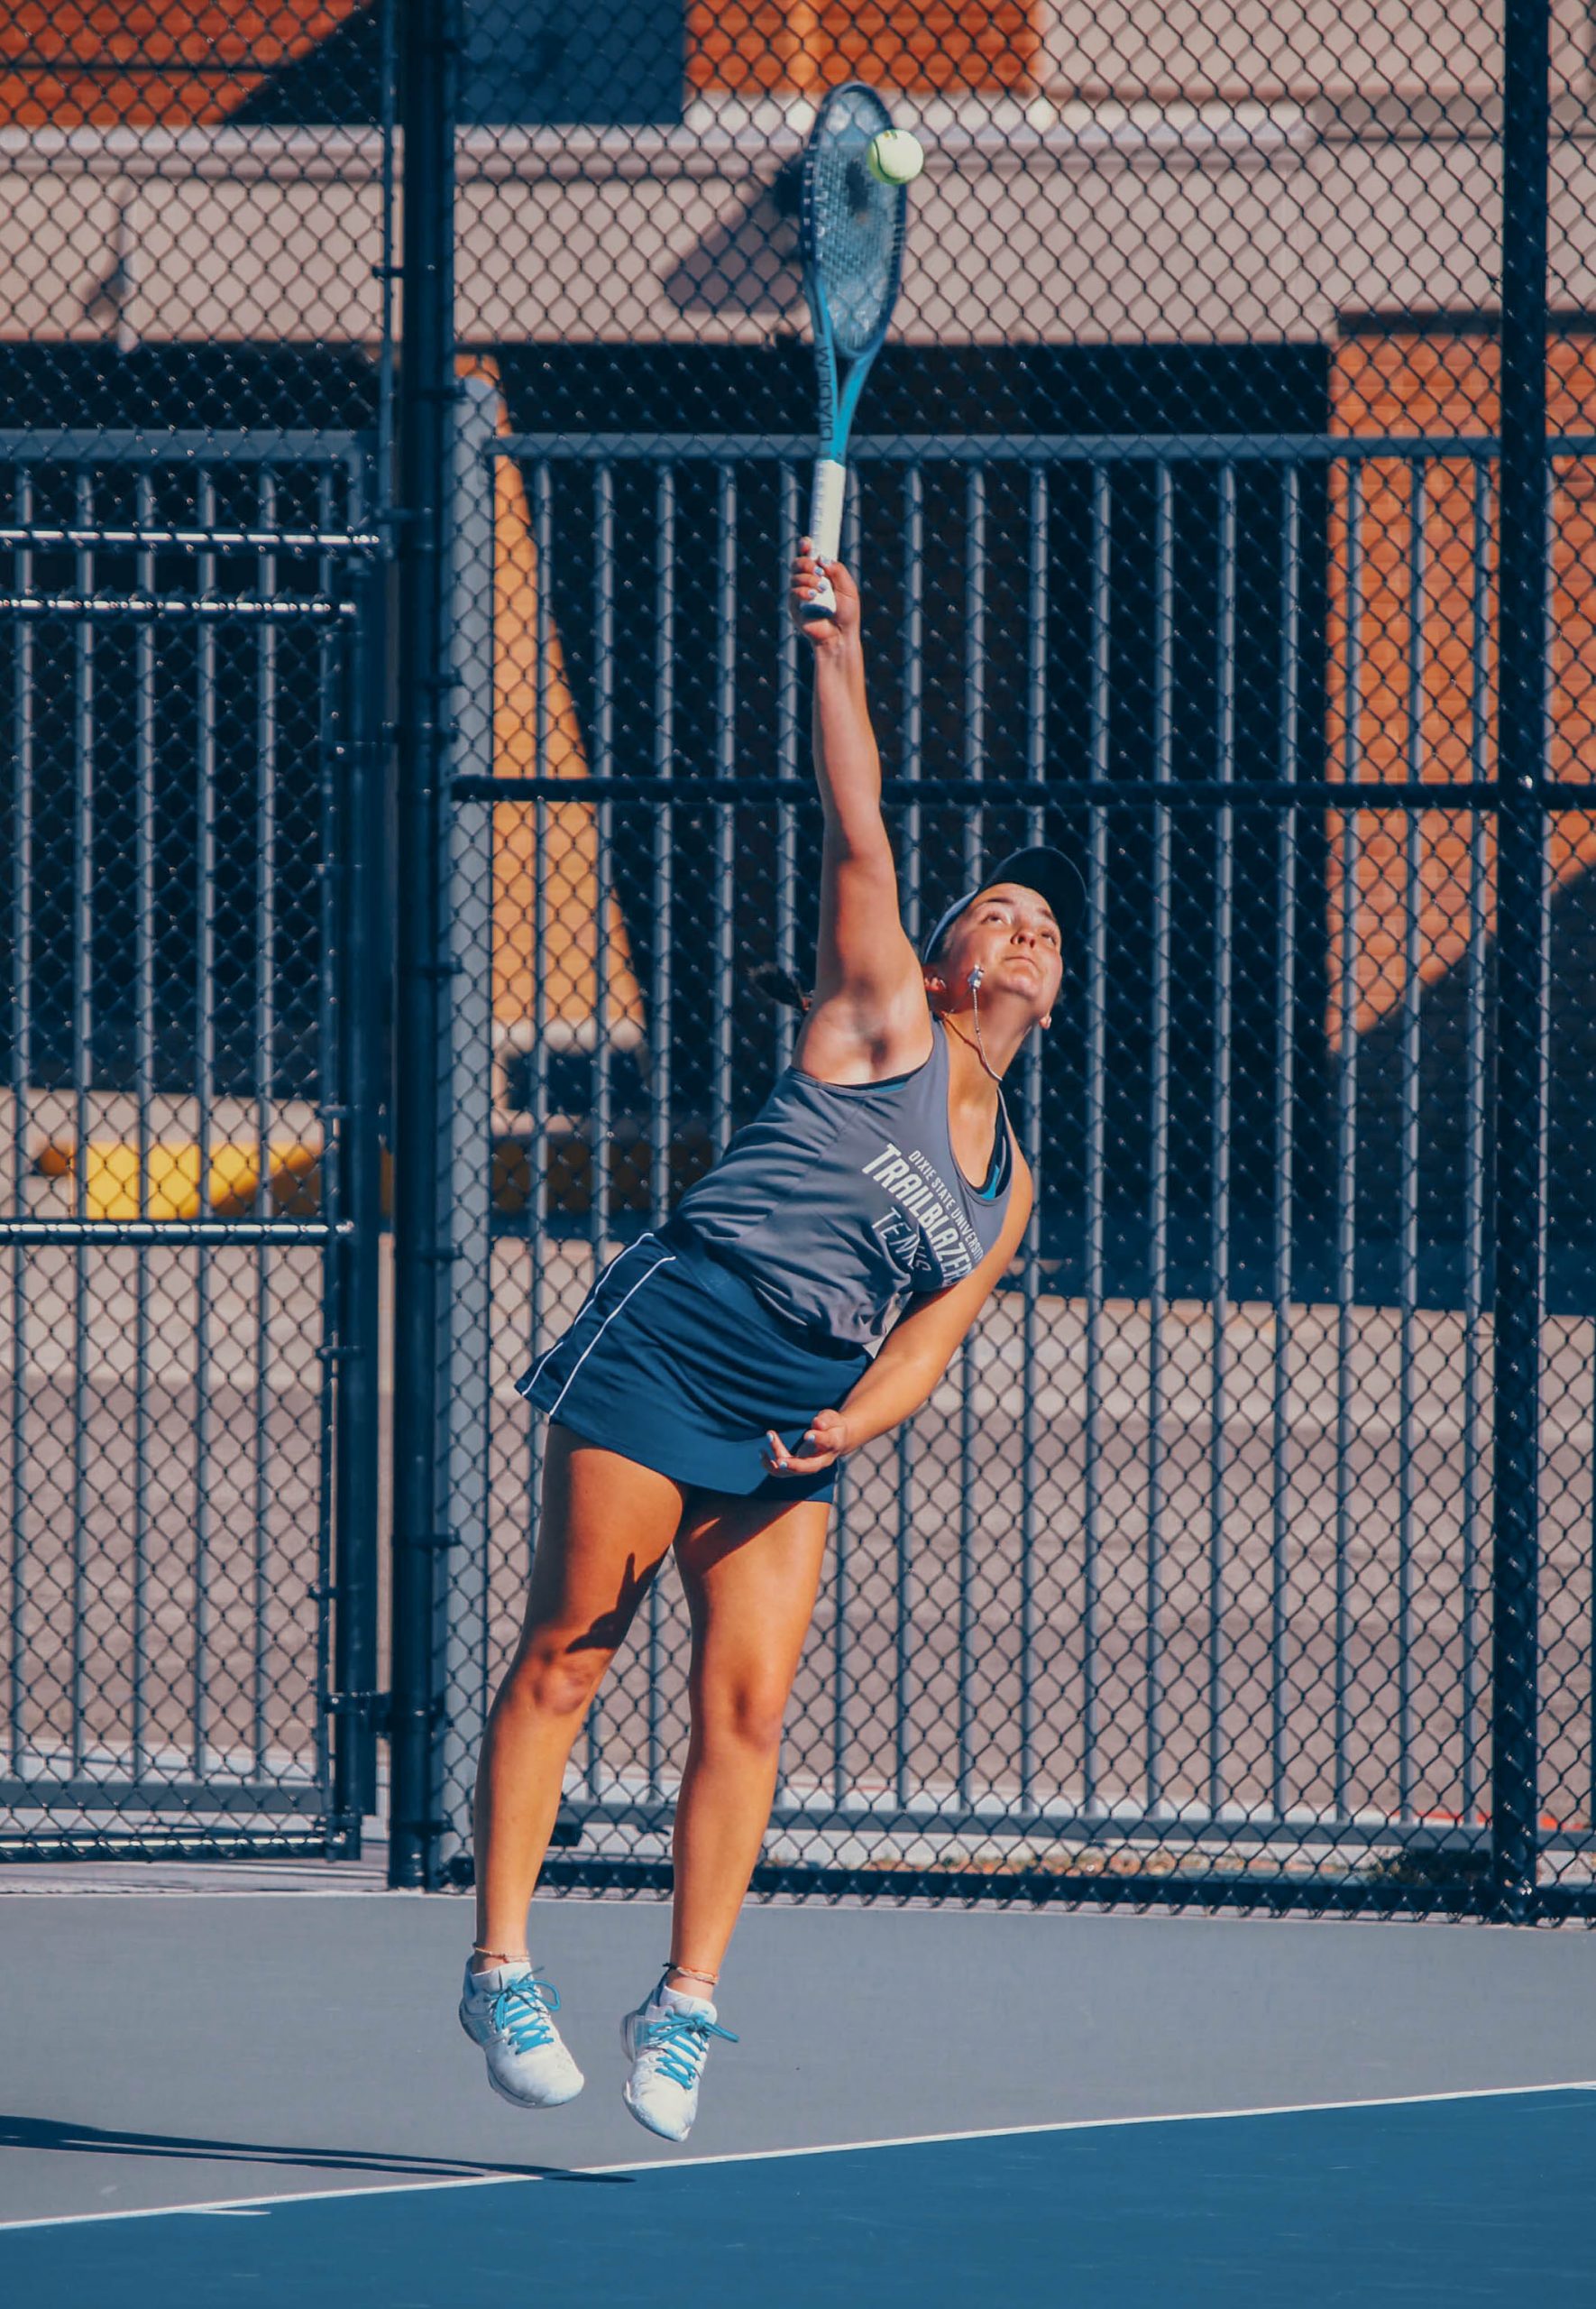 Women’s tennis eager to compete again